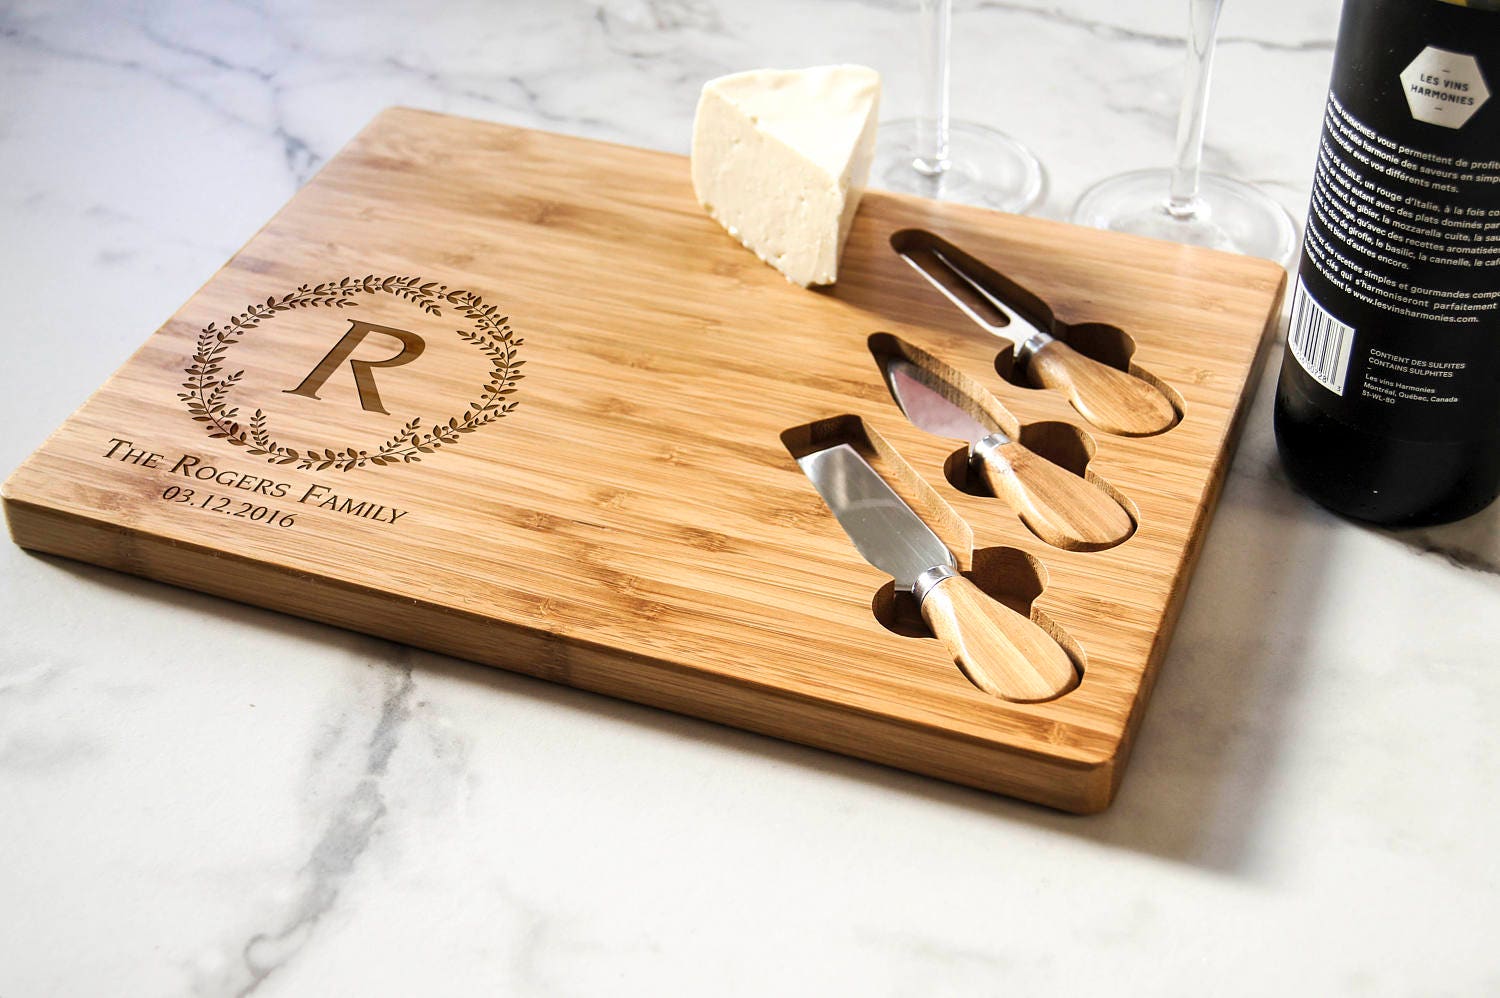 Personalized cheese board set, Custom cheese board set, Engraved cutting board, Wedding gifts